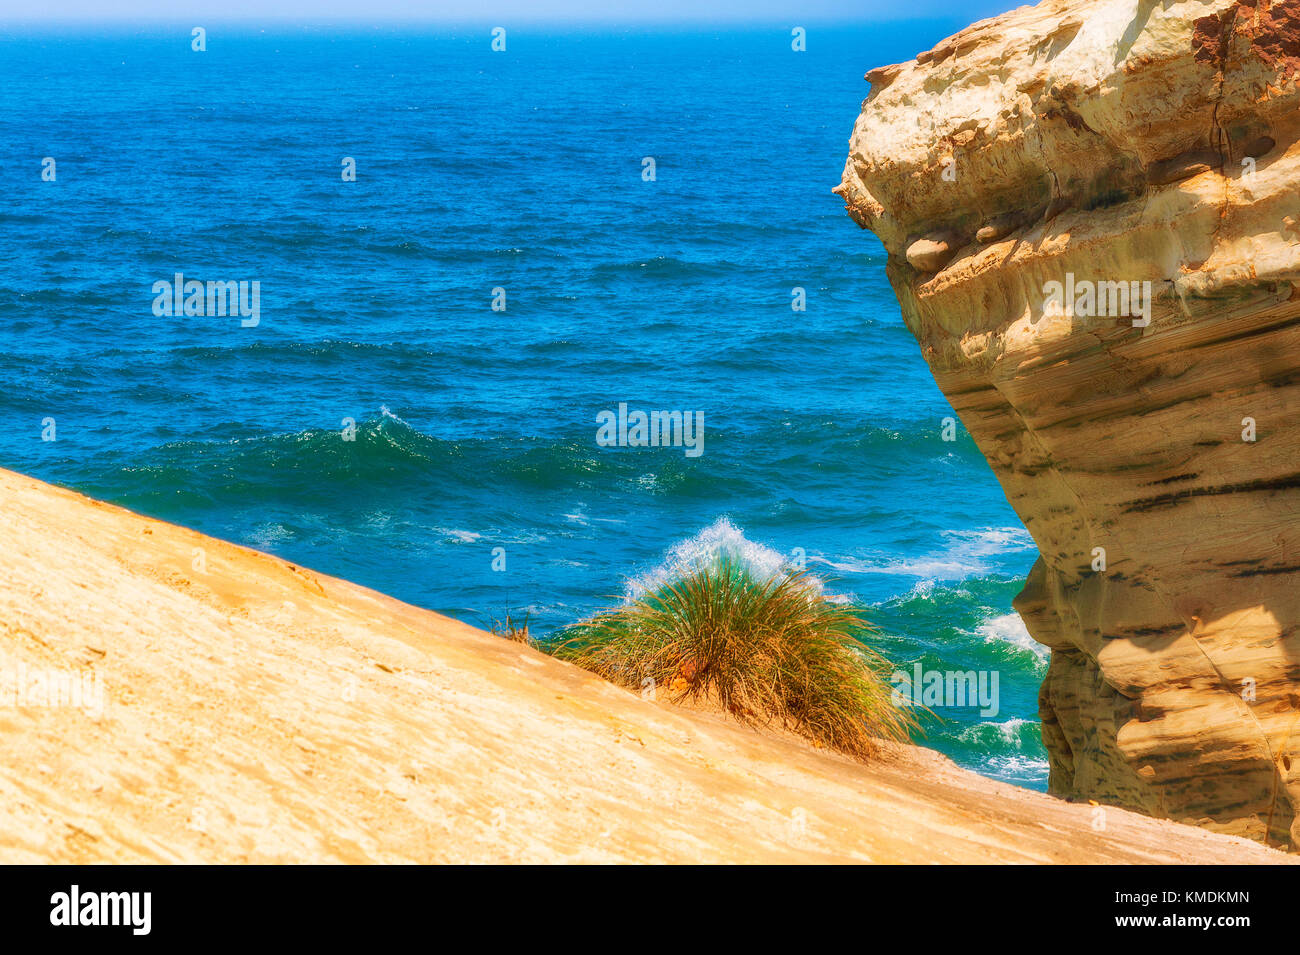 Sandstone stands out against the blue waters of the Pacific Ocean Stock Photo